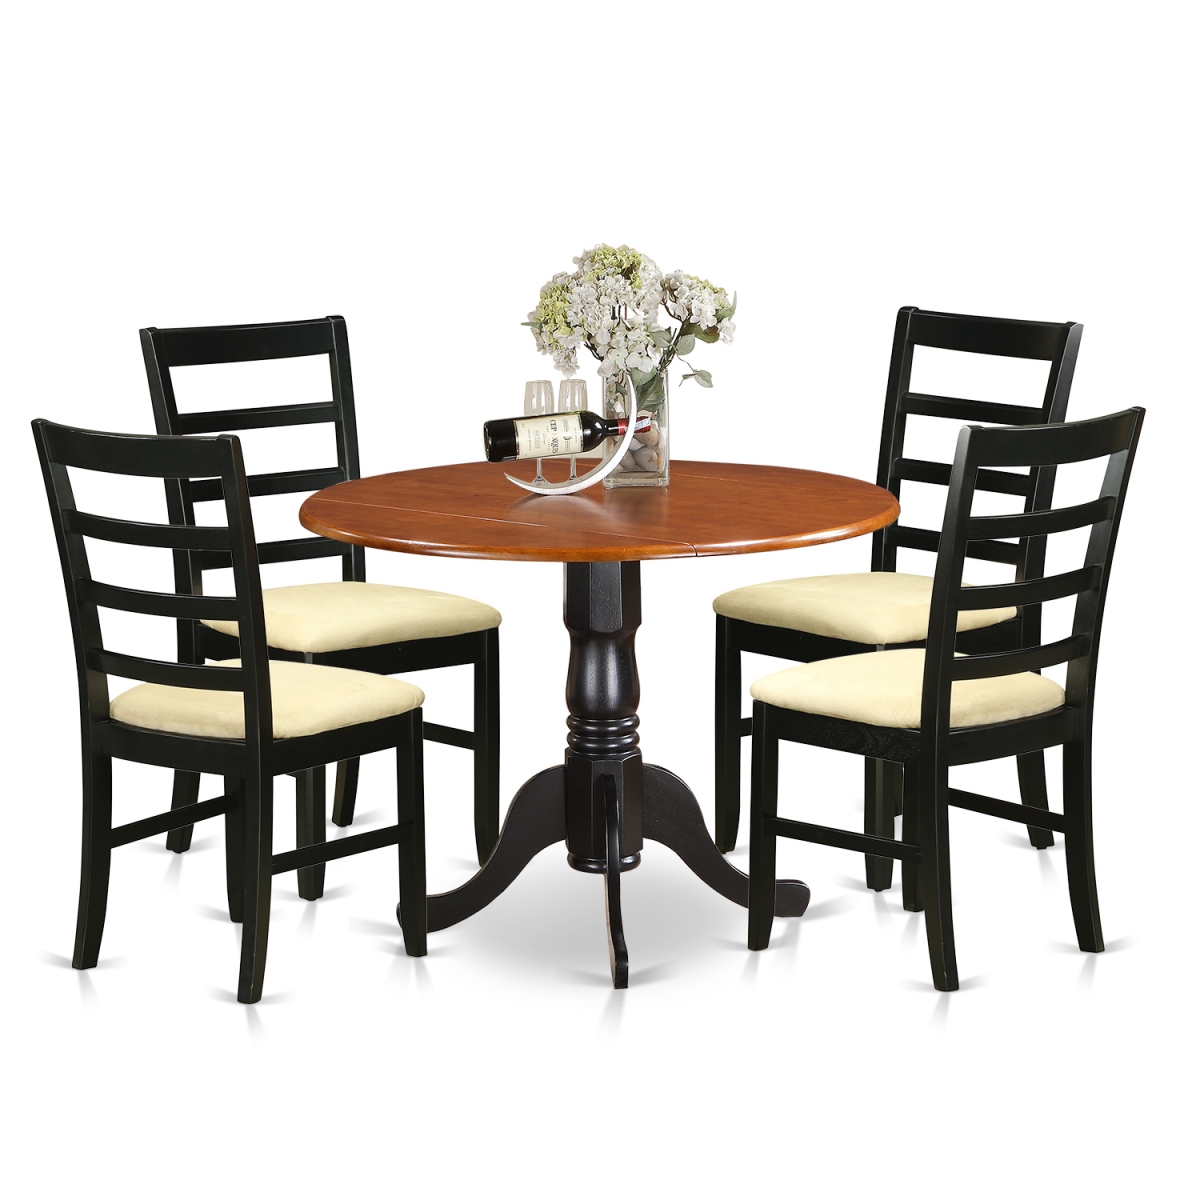 Picture of East West Furniture DLPF5-BCH-C Microfiber Dublin Kitchen Table Set - Dining Table & 4 Wooden Chairs, Black & Cherry - 5 Piece